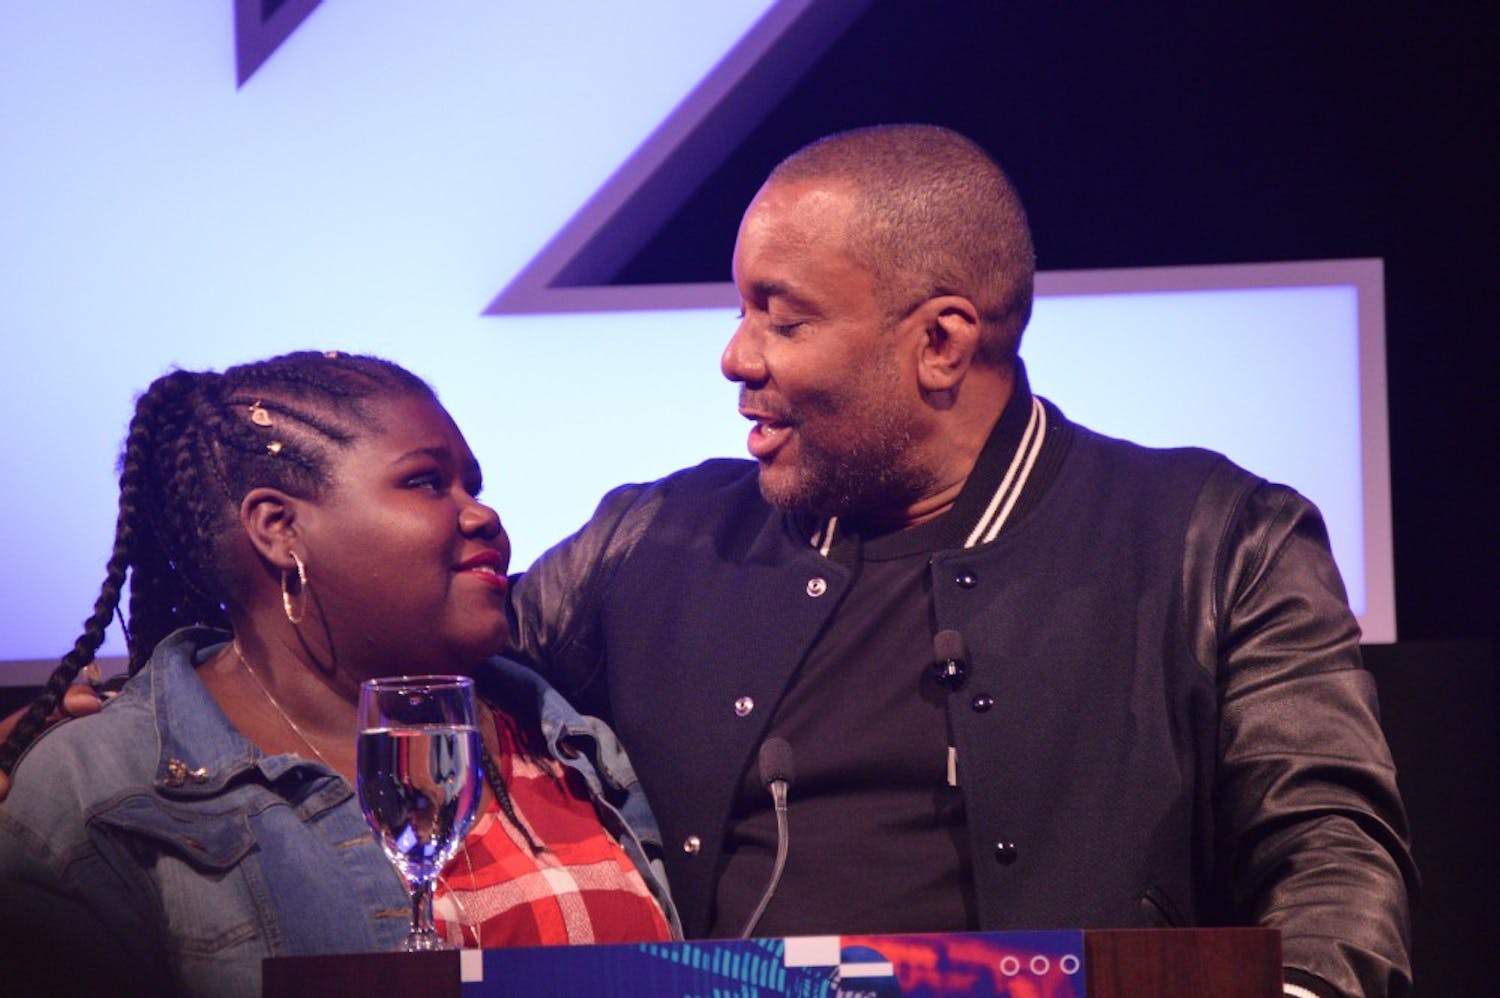 Actress Gabourey Sidibe of "Precious"&nbsp;joins Lee Daniels onstage for an emotional reunion.